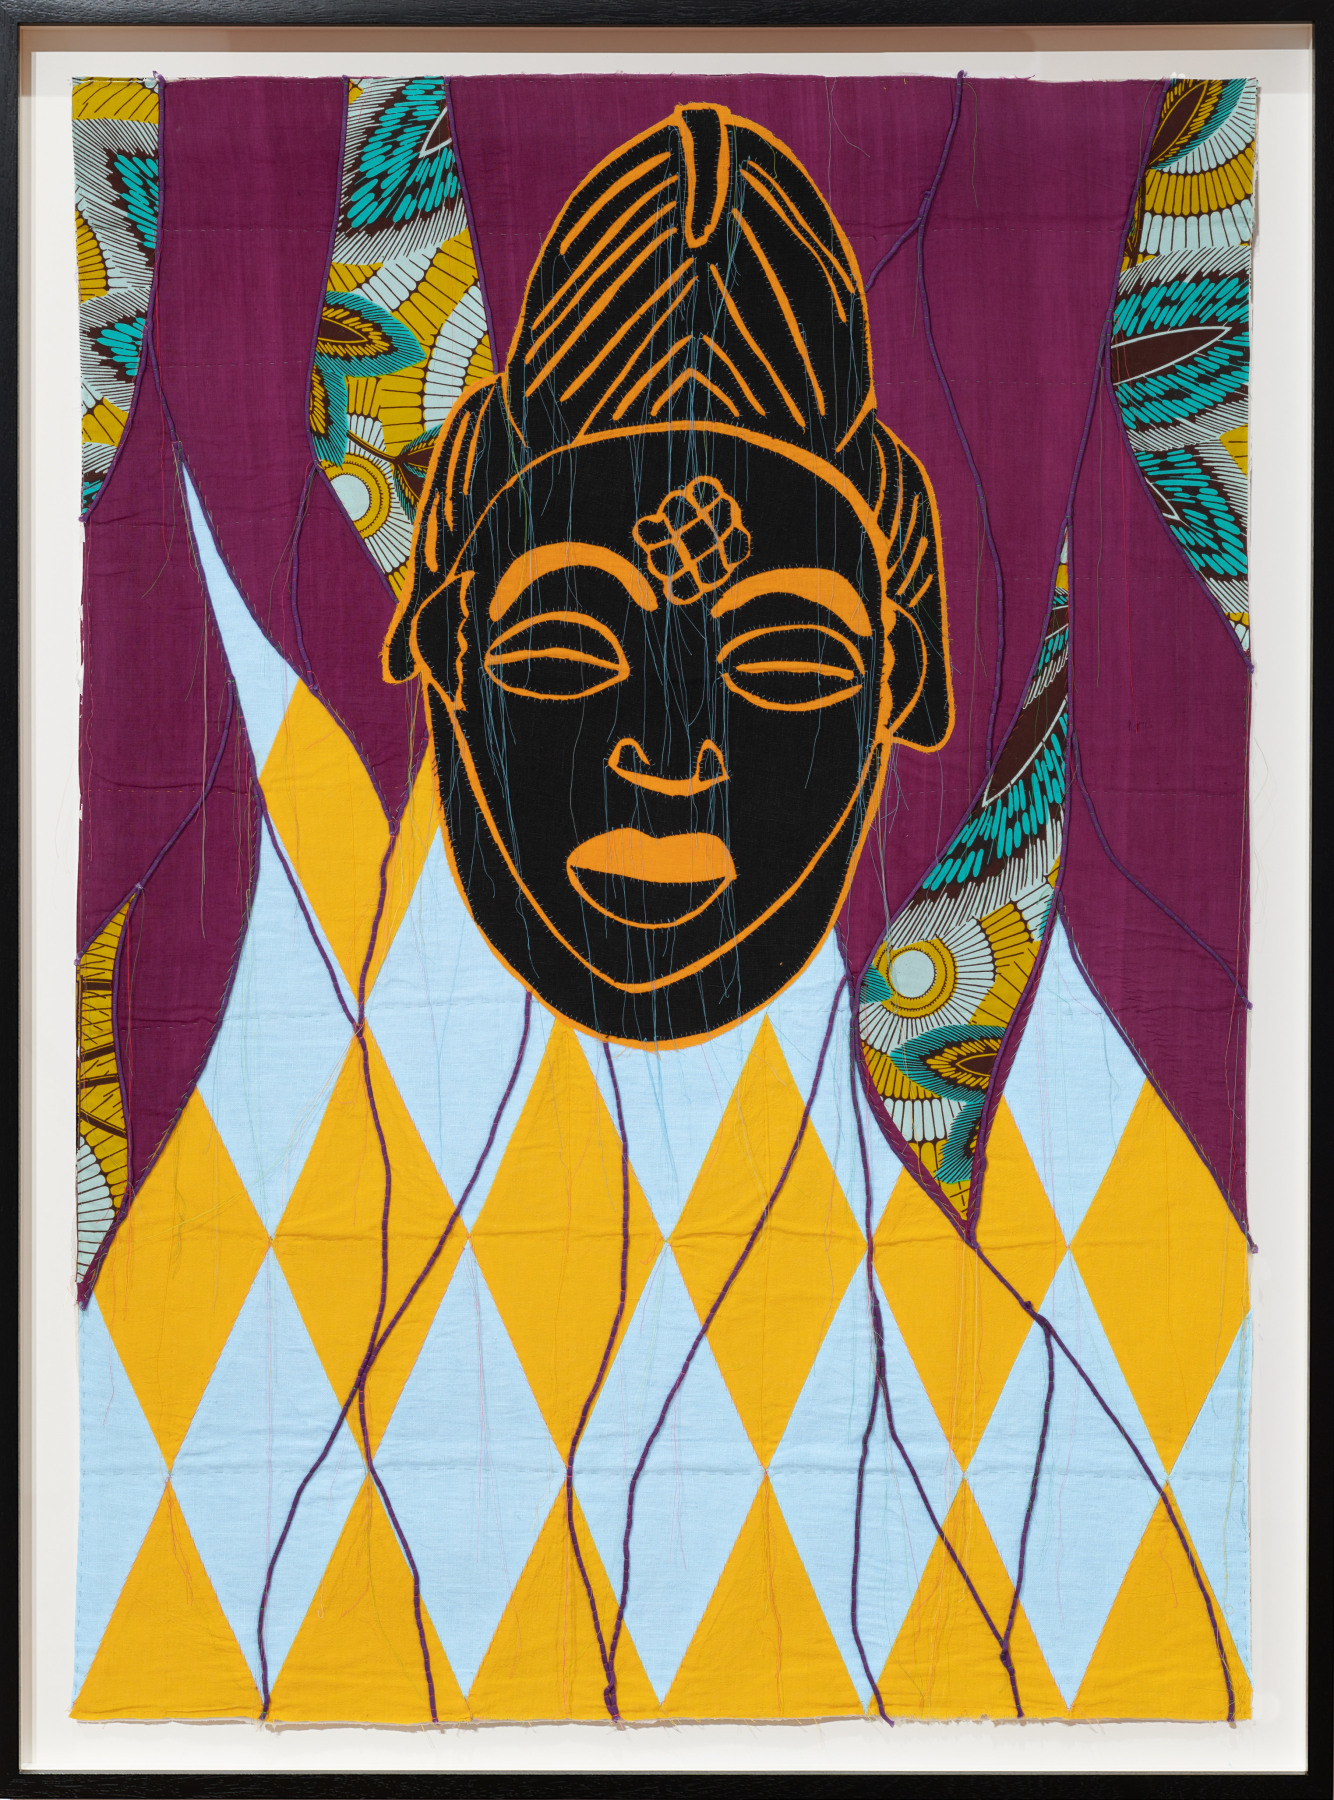 Yinka Shonibare | Restitution of the Mind and Soul - Goodman Gallery, Cape Town - Viewing Room - Goodman Gallery Viewing Room